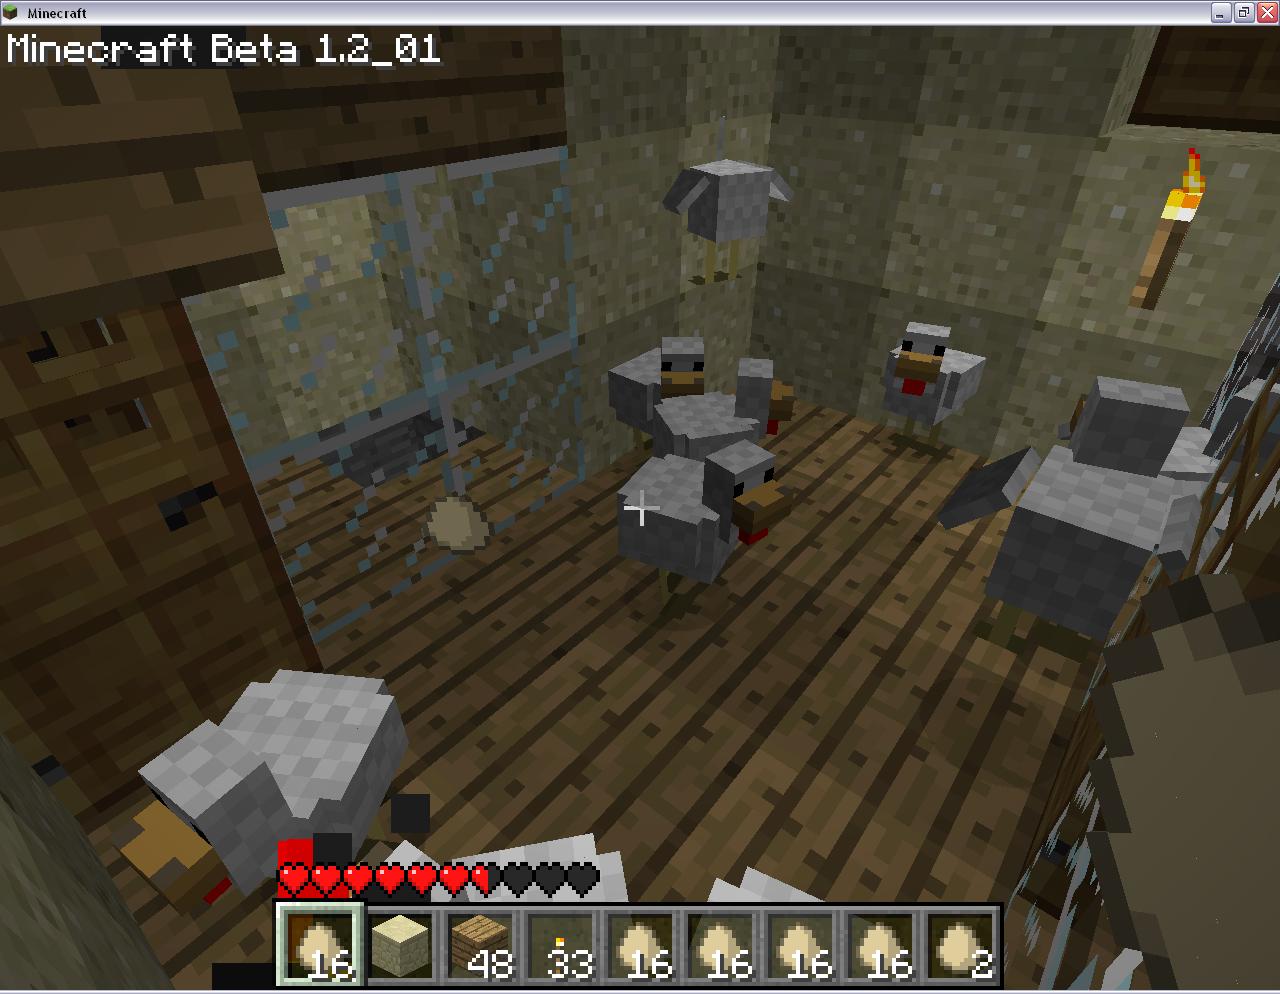 Mincraft chicken farm
in the middle of a desert :3